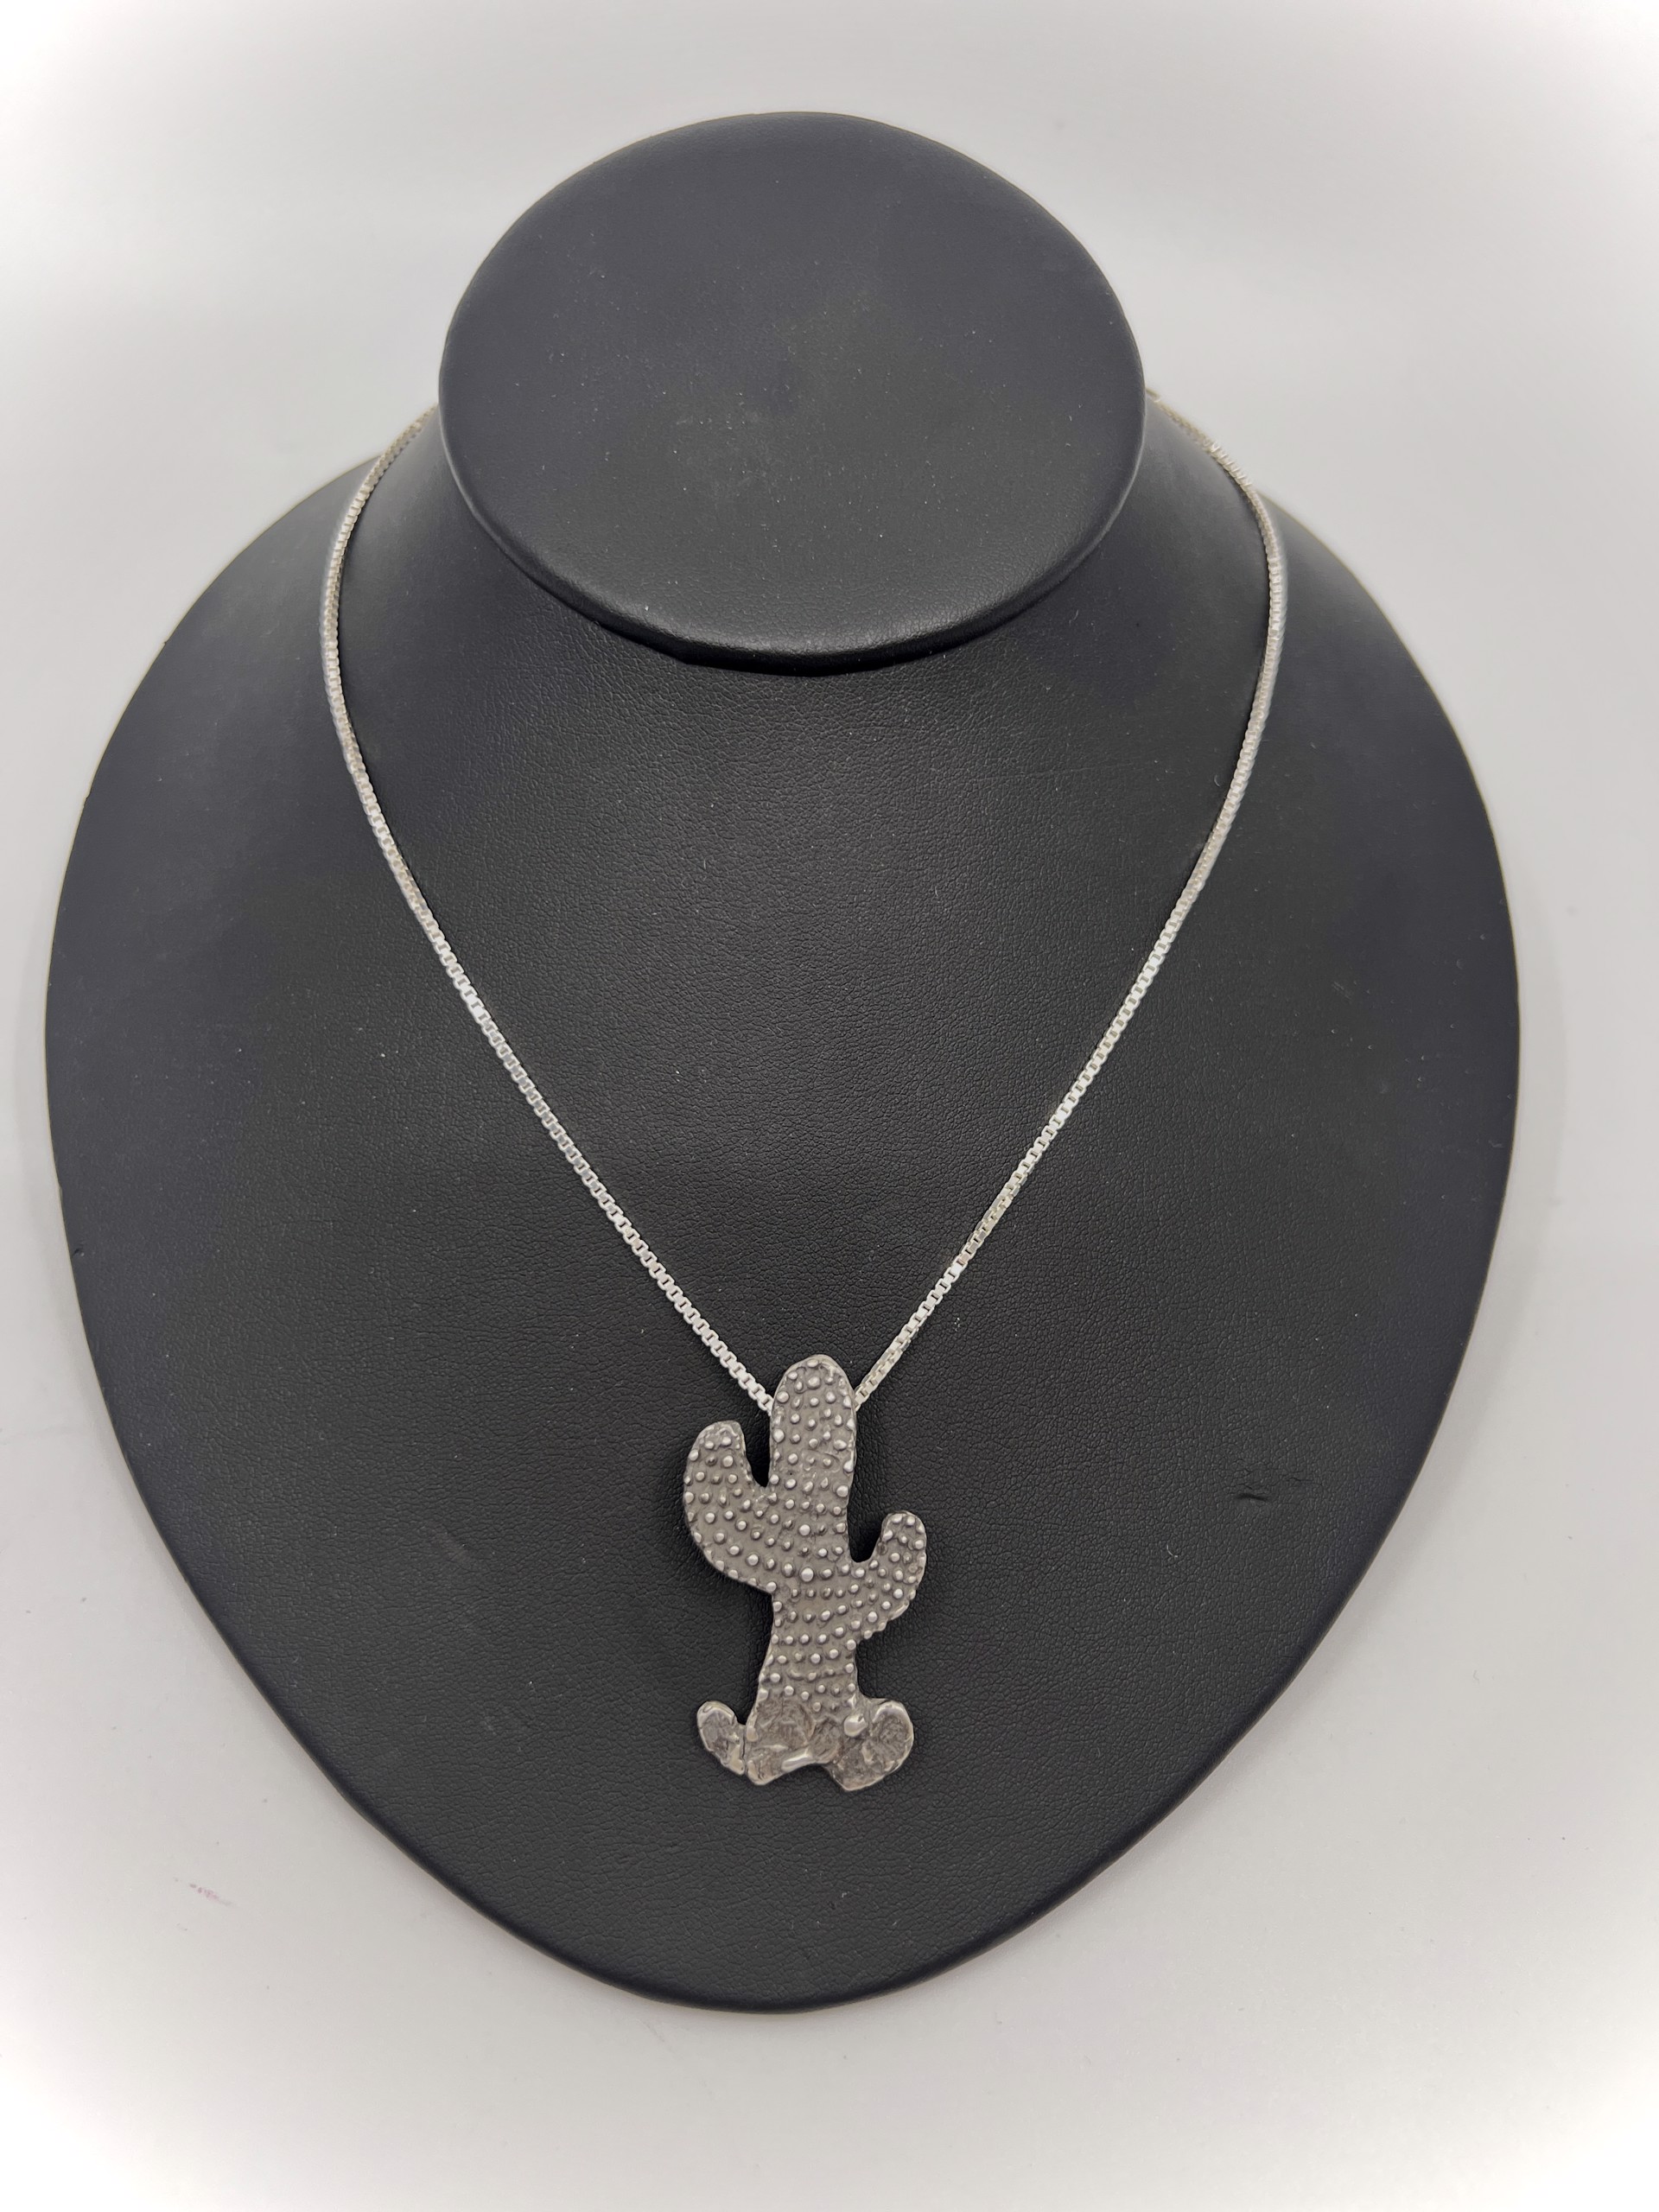 9598 Granulated Cactus Pendant on Sterling Silver Box Chain by Beth Benowich